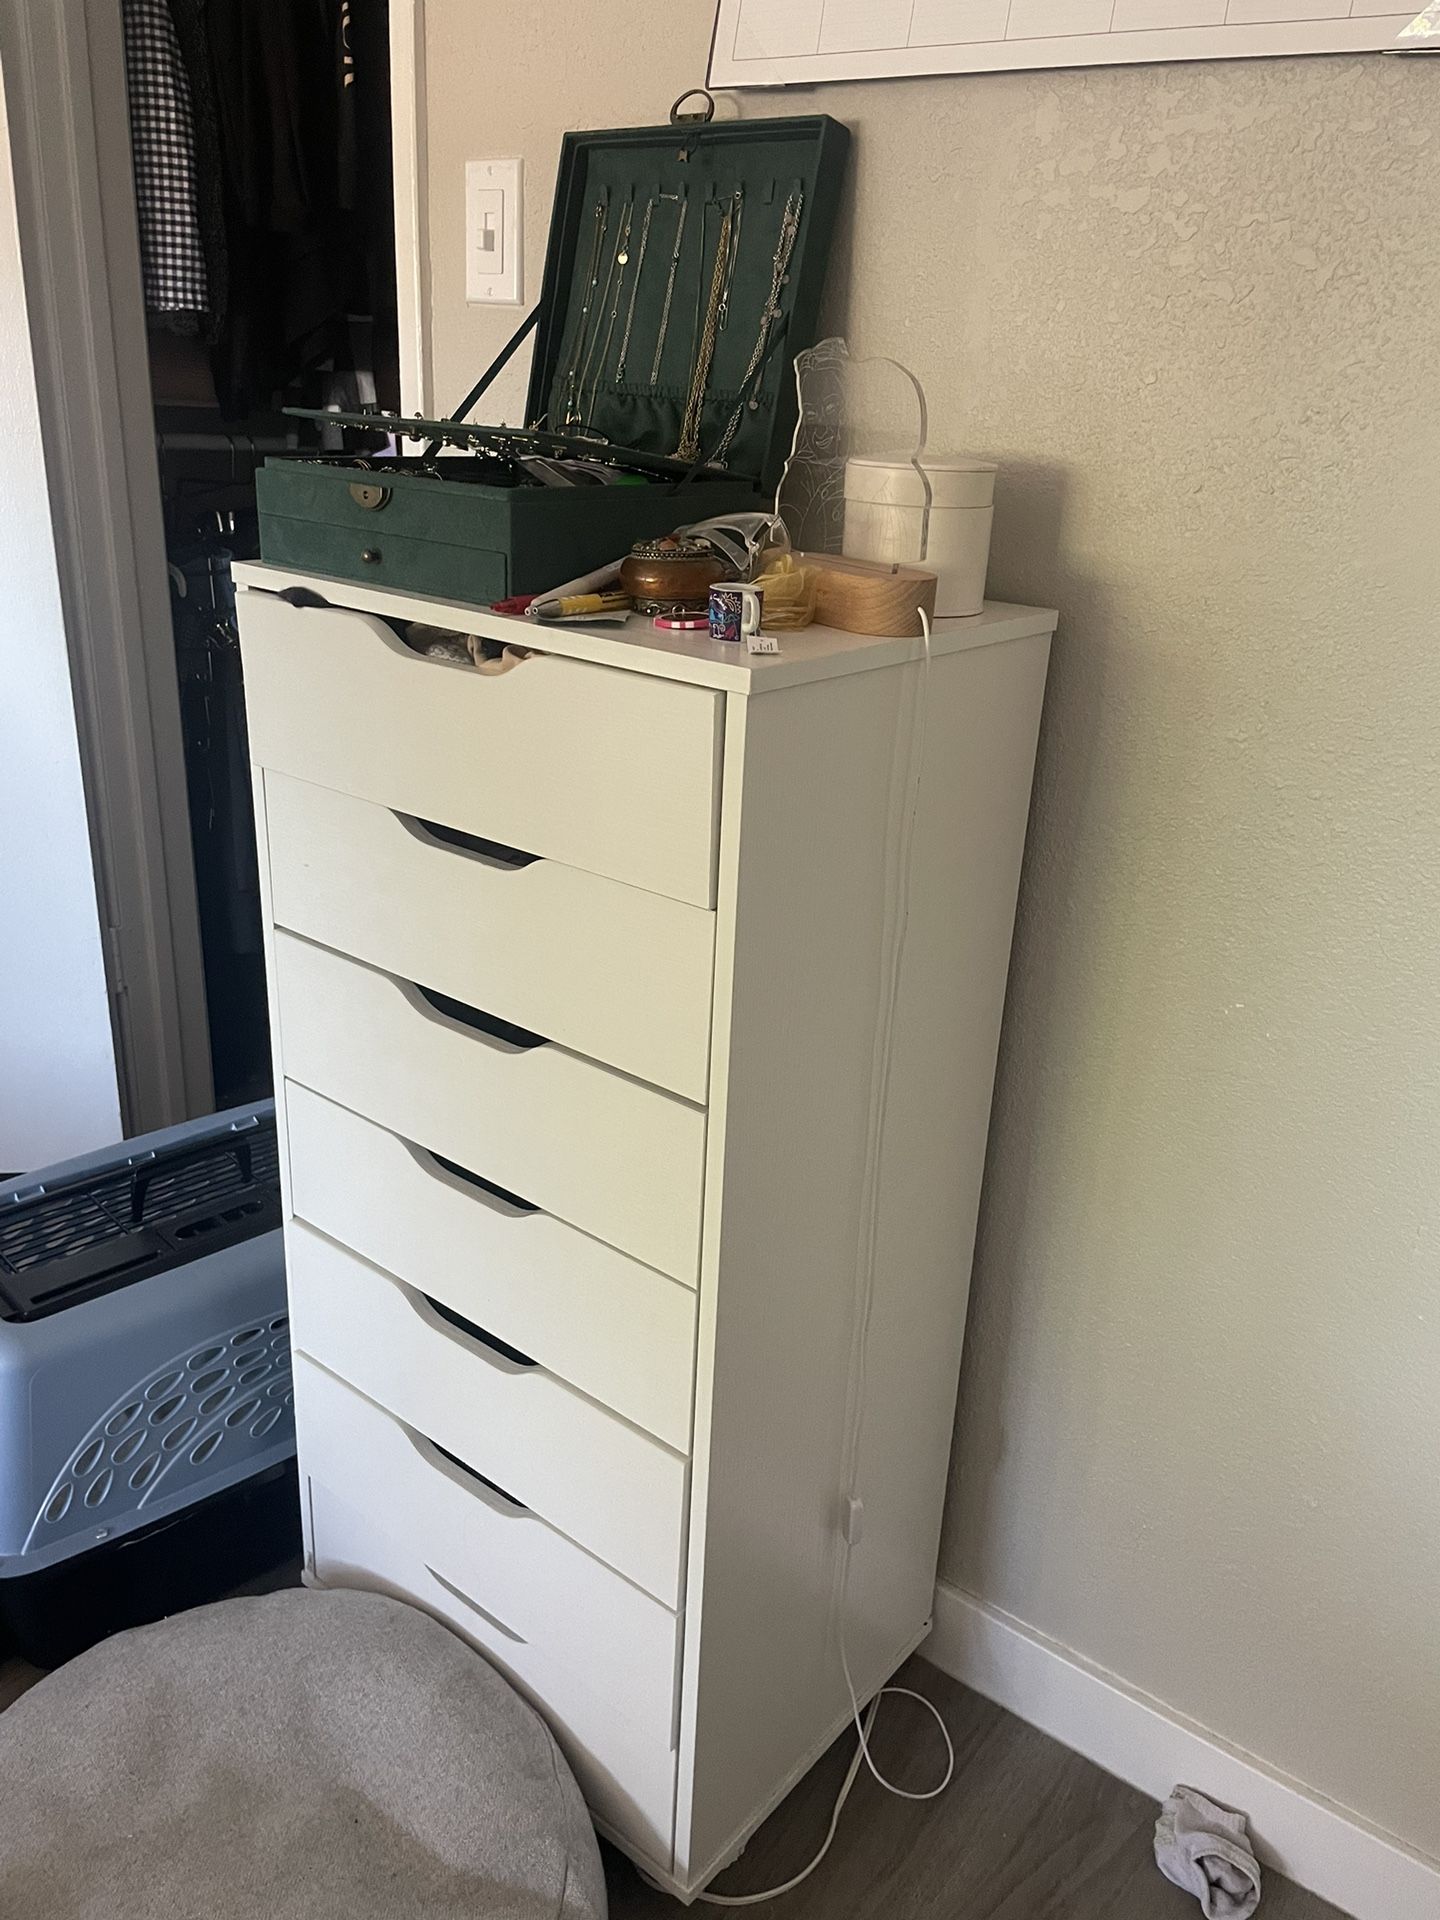  Dresser With Drawers And Wheels